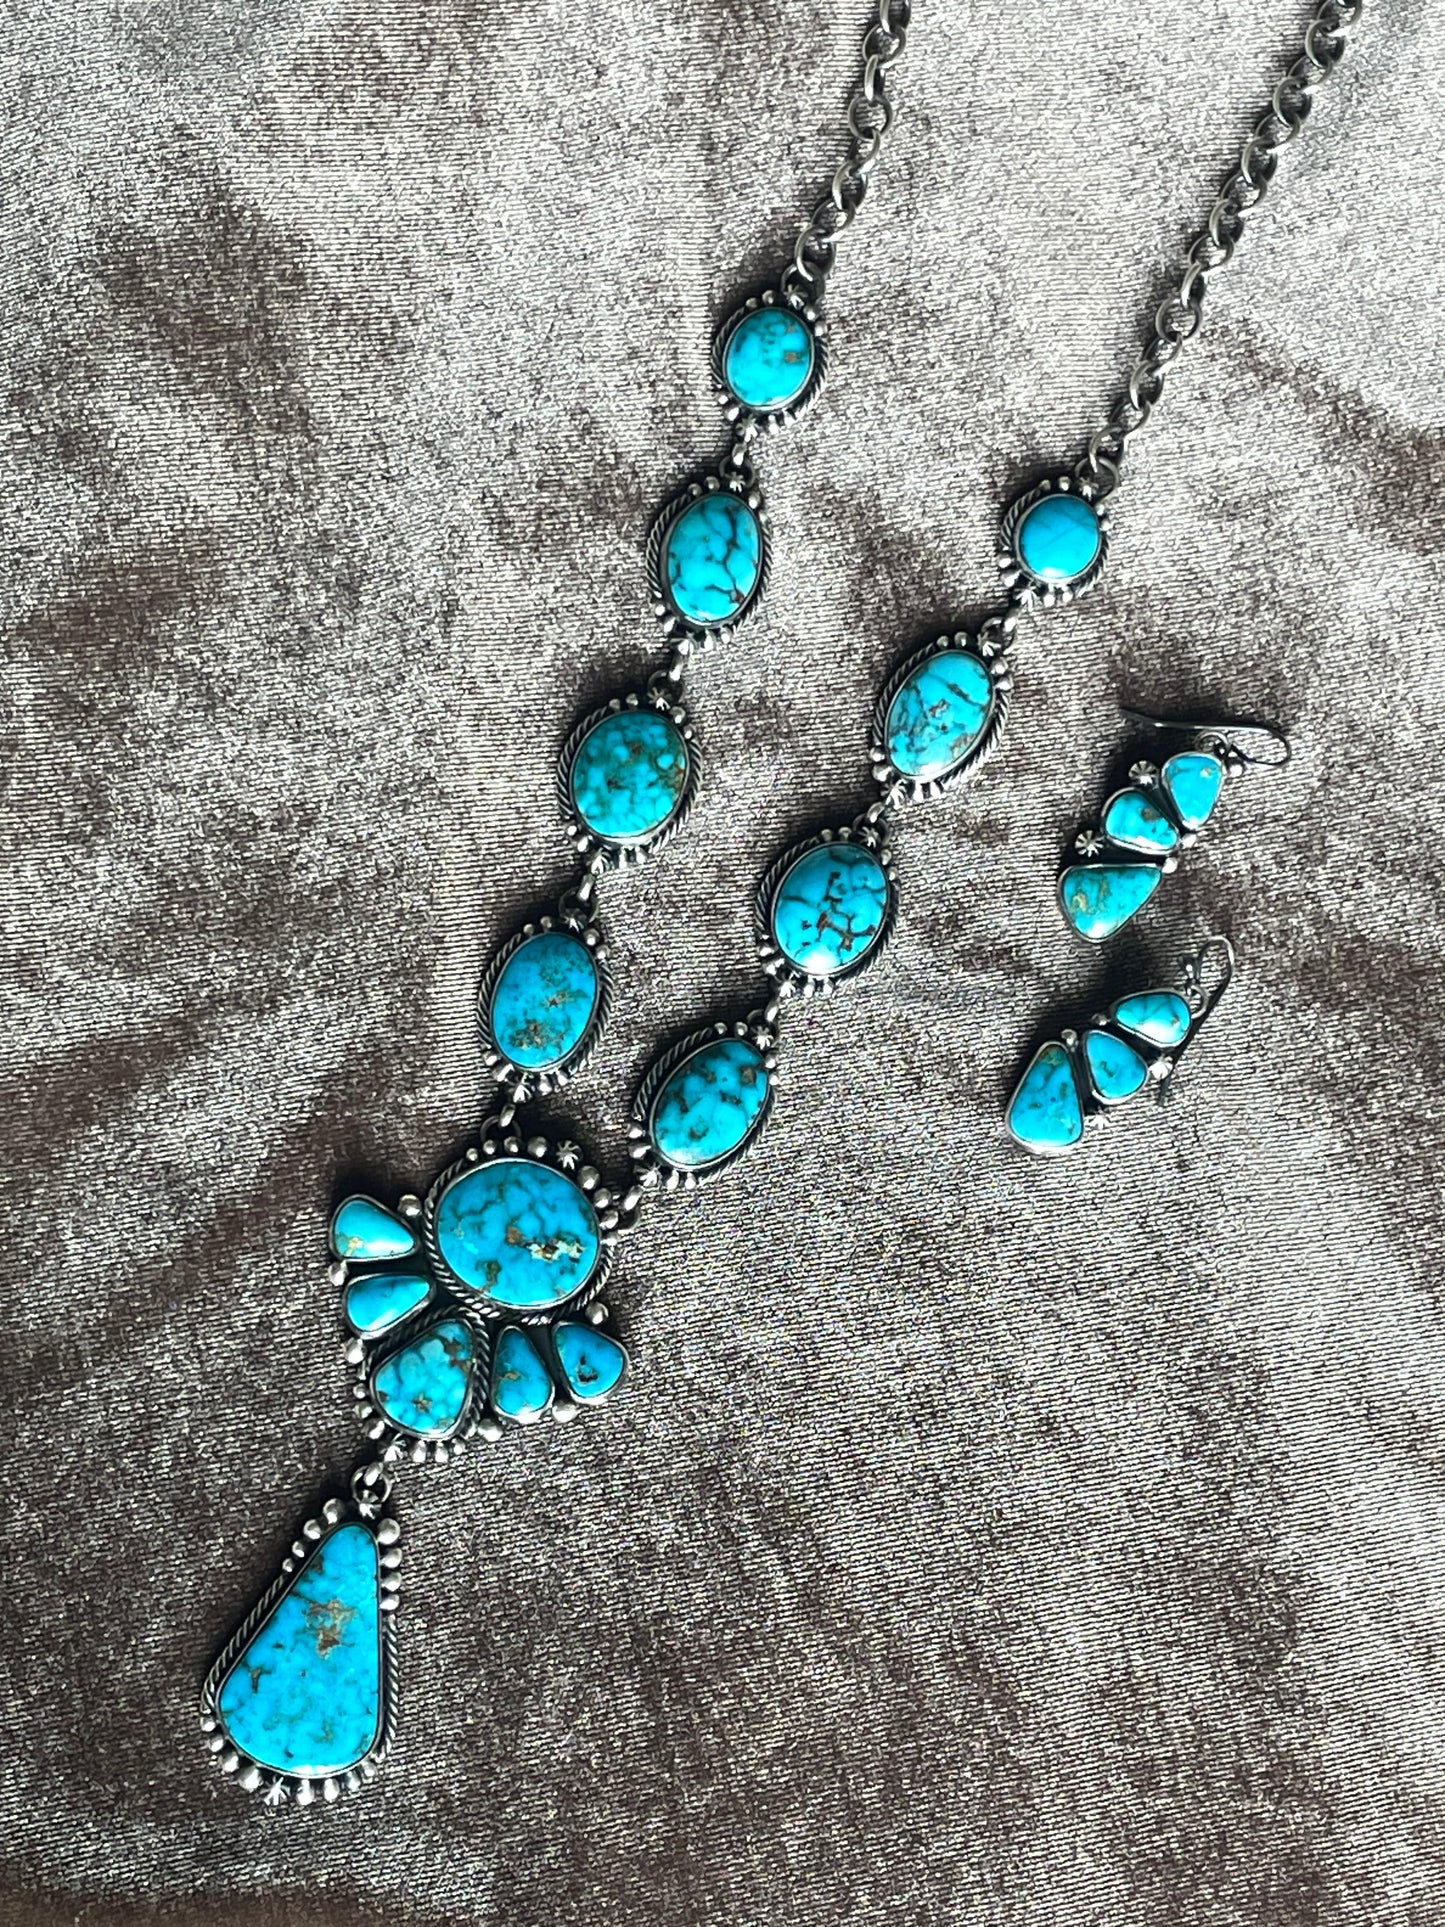 Breathtaking beauty! Blue Ridge Necklace and earrings set by A. Martin